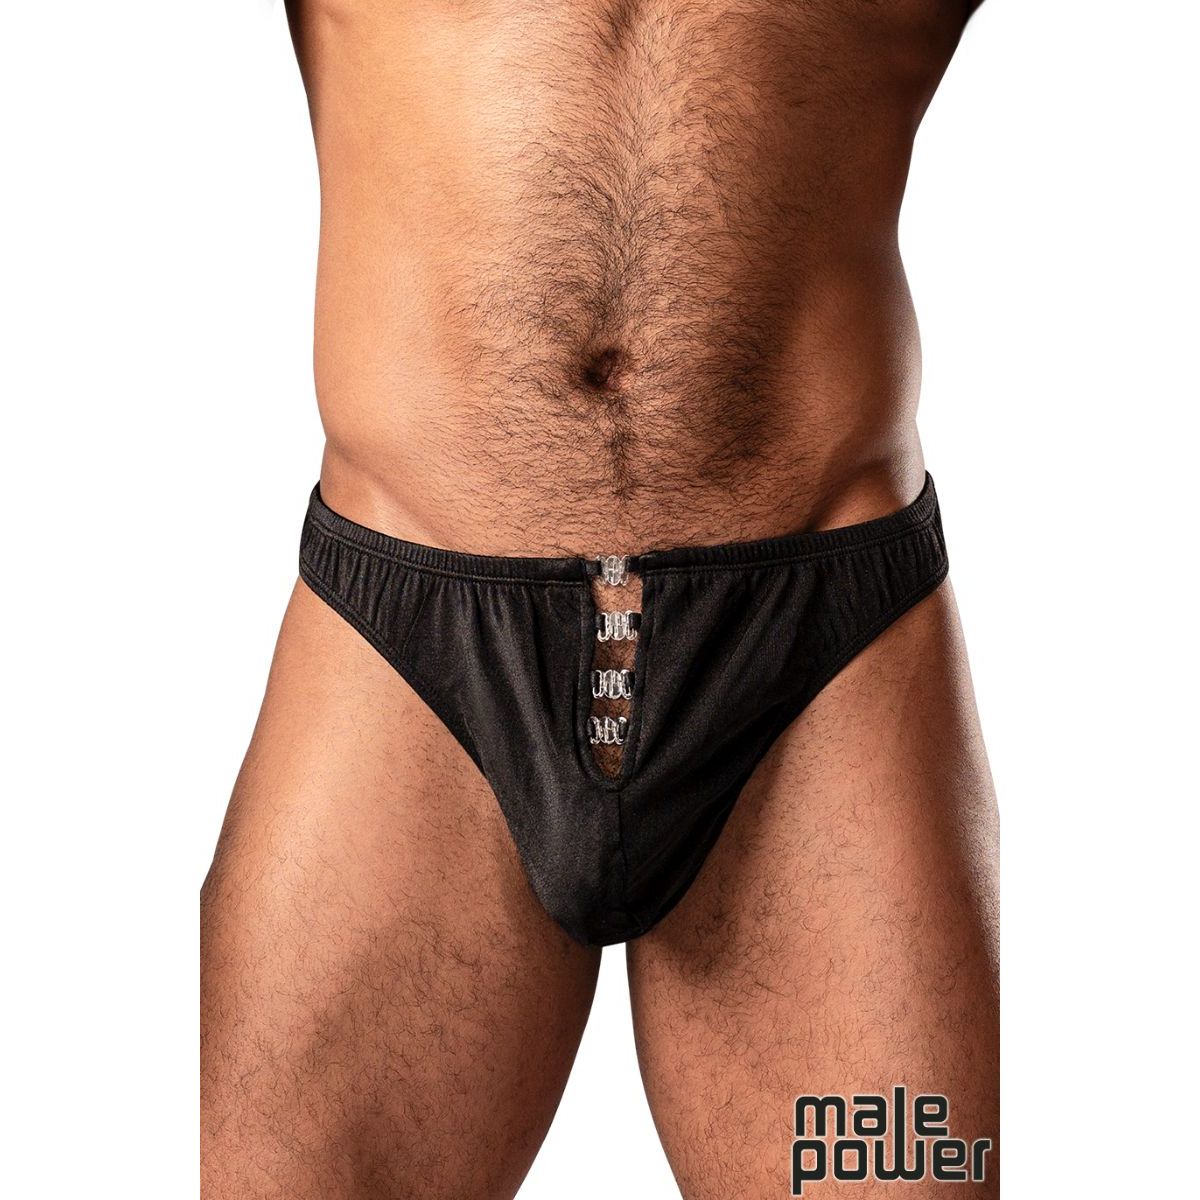 4 Clip Men's Thong by Male Power